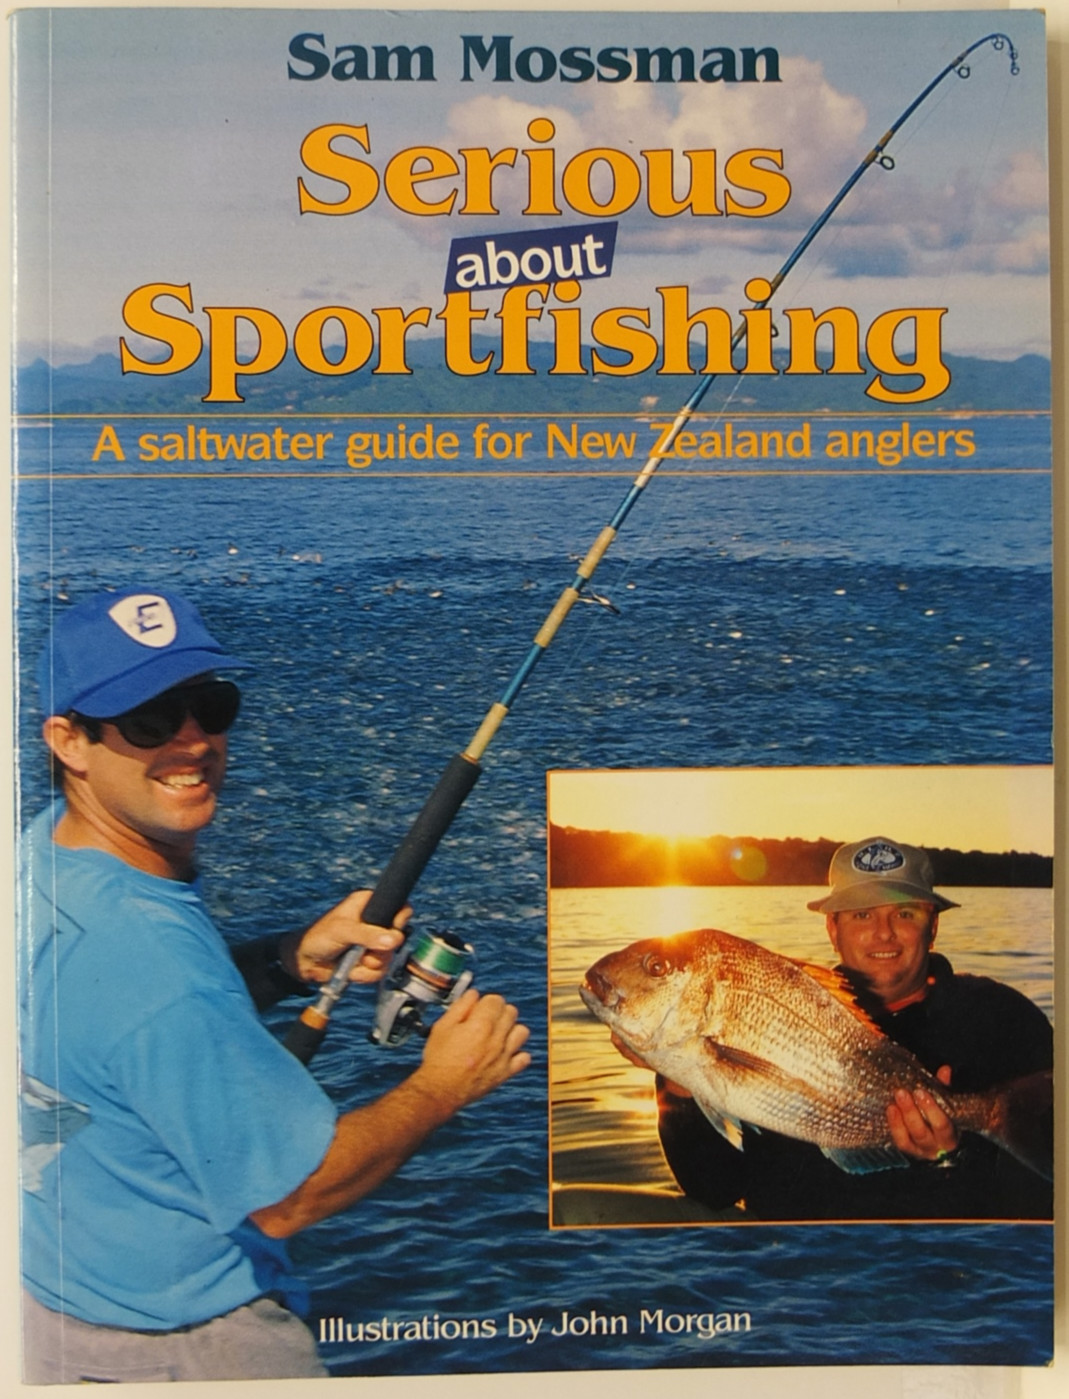 Subscribe to Saltwater Boat Angling